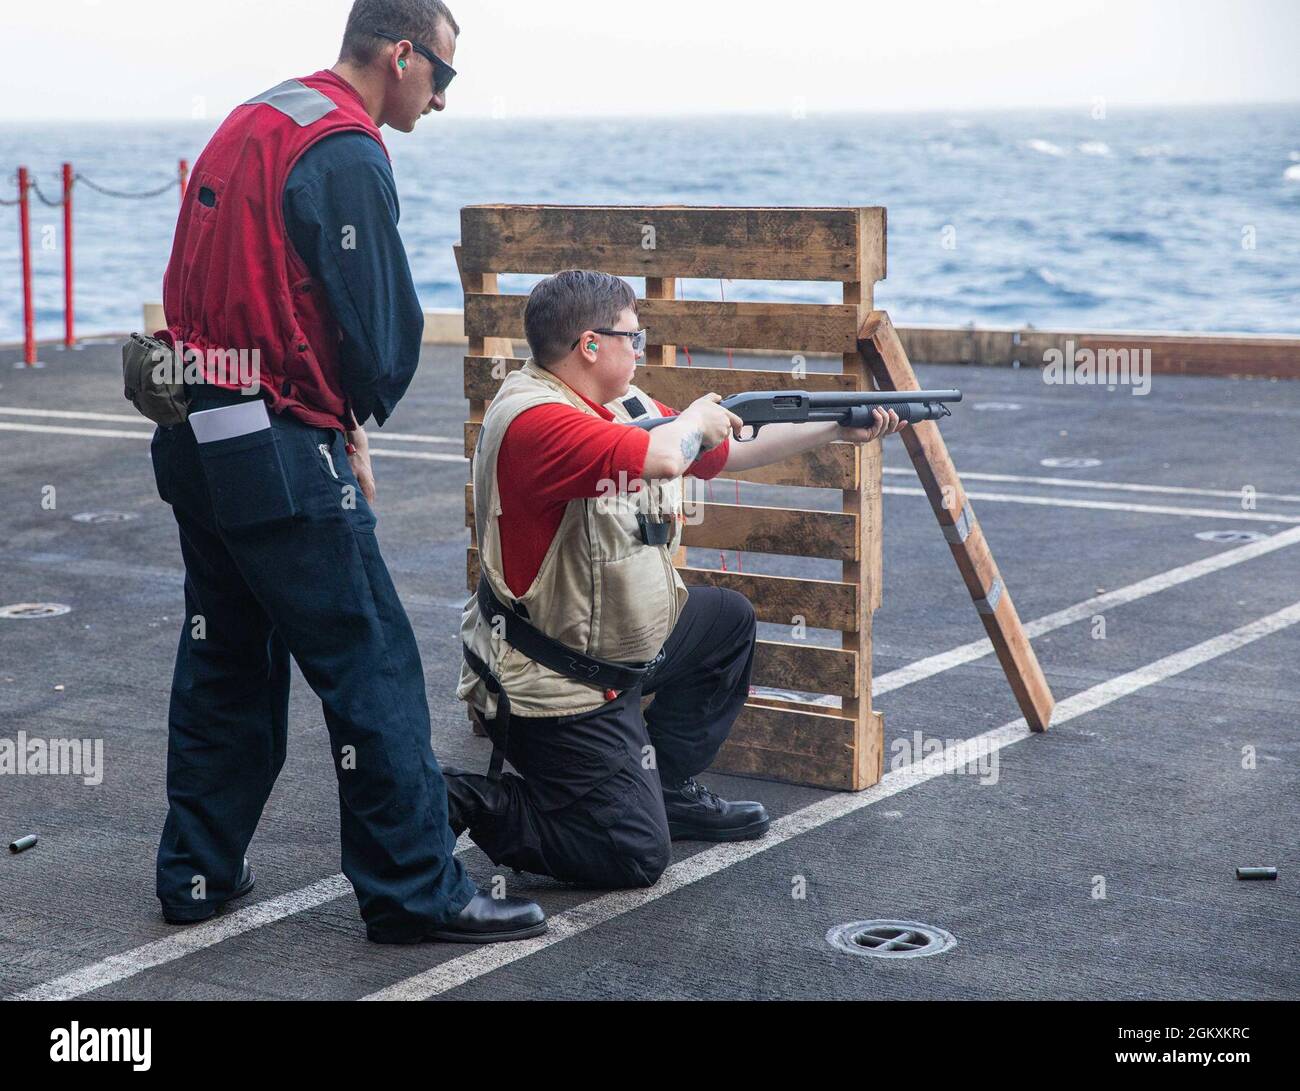 210720-N-NY362-1067 ARABIAN SEA (July 20, 2021) – Master-at-Arms 2nd Class Amanda Wagner, right, fires an M500 shotgun during a live-fire qualification course aboard aircraft carrier USS Ronald Reagan (CVN 76) in the Arabian Sea, July 20. Ronald Reagan is deployed to the U.S. 5th Fleet area of operations in support of naval operations to ensure maritime stability and security in the Central Region, connecting the Mediterranean and Pacific through the western Indian Ocean and three strategic choke points. Stock Photo